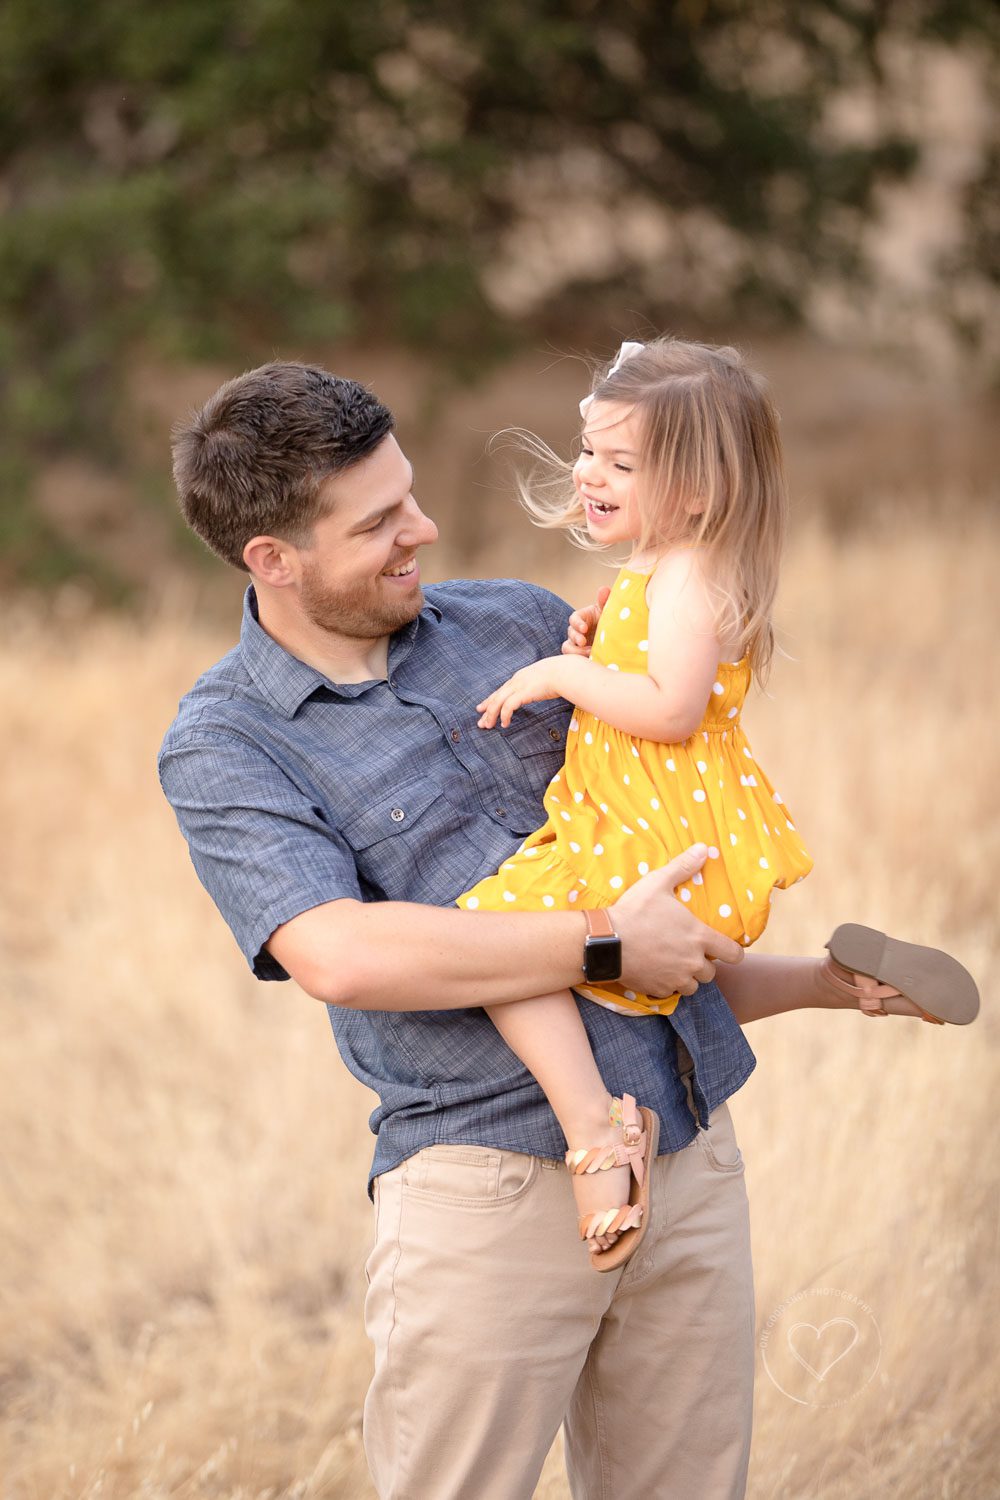 Dad and daughter laughing in a grassy field, Fresno, Clovis, photographer